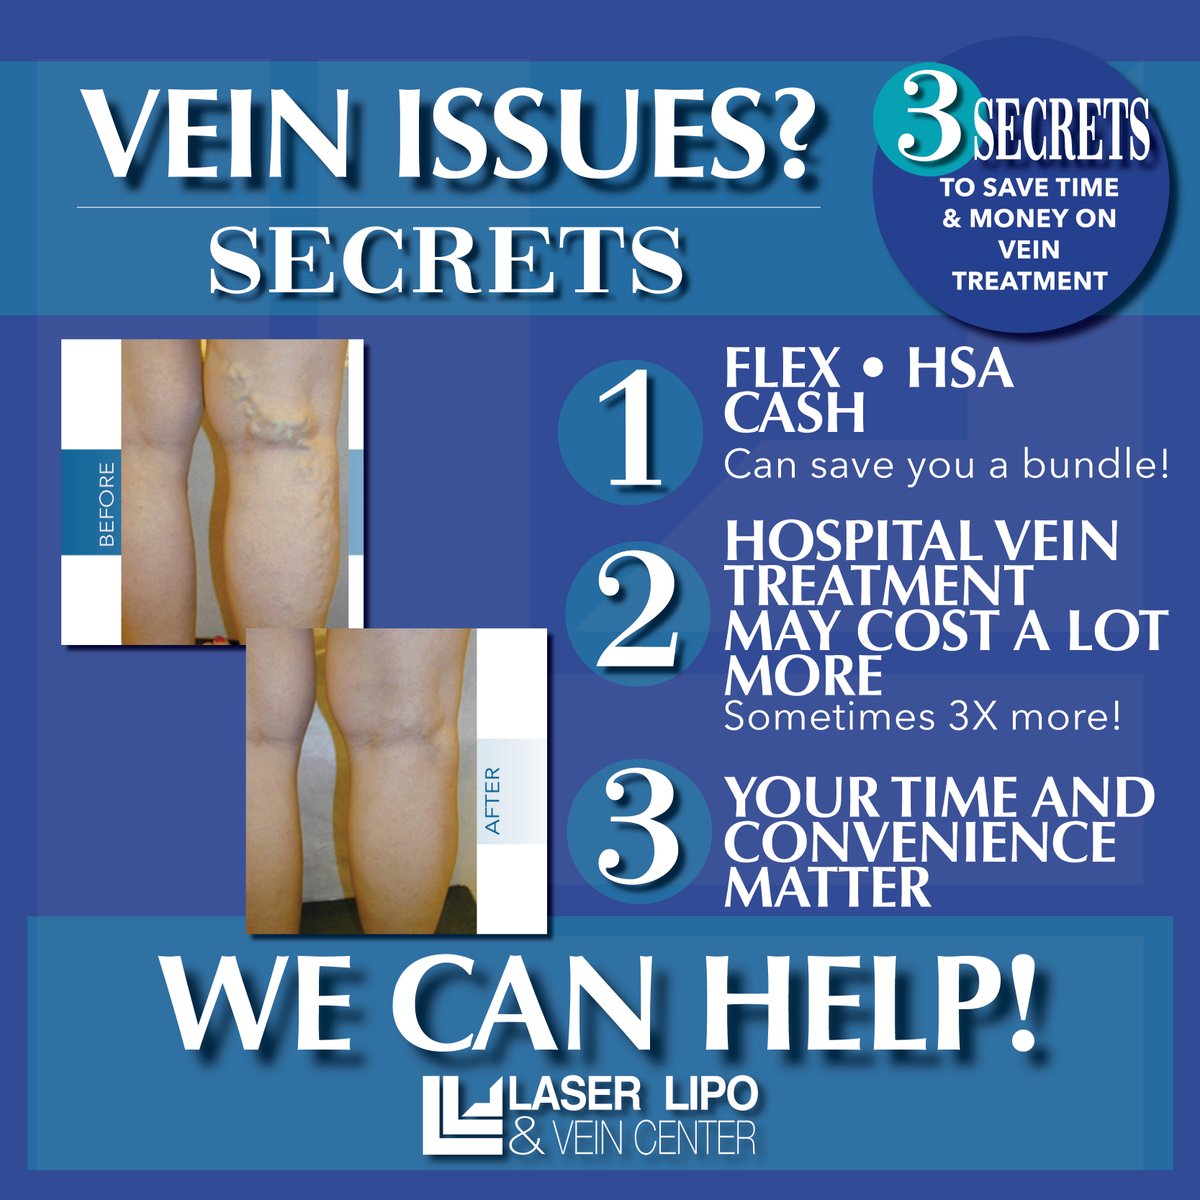 ☀️ Don't let vein issues hold you back from summer activities! From aching legs to protruding veins, we offer solutions to help you feel comfortable and confident. Book your consultation now at 636-614-1665 and get ready to embrace the sunshine!
#VeinDisease #LLVC